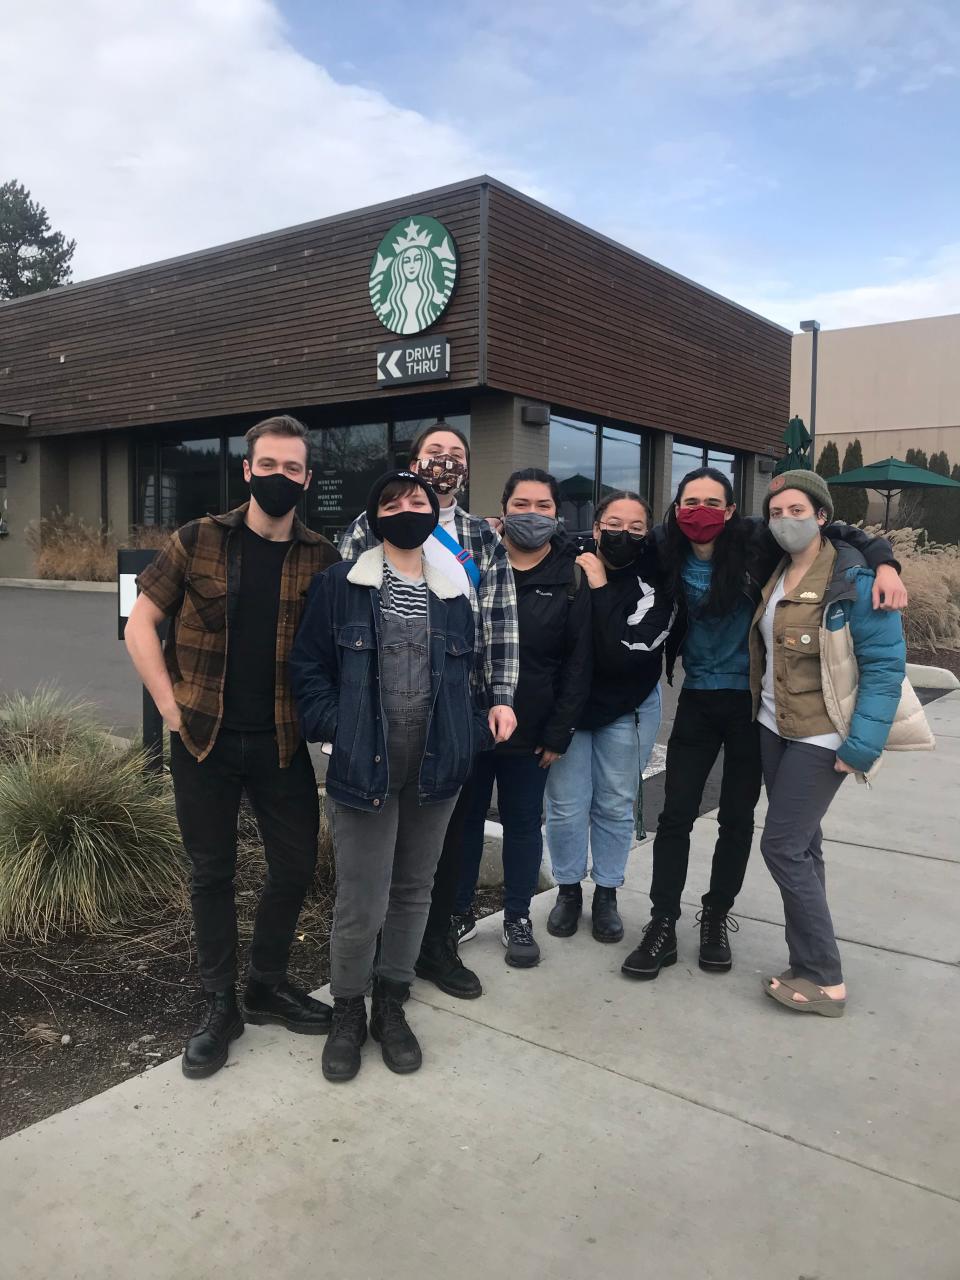 South Eugene Starbucks workers Jake LaMourie, from left, Bex Littleton, Marie Alexander, Jazmin Espinoza, Janessa Voyce, Quentin J. Piccolo and Ky Fireside stand outside their workplace at 2830 Willamette St. The workers are petitioning to get unionized.